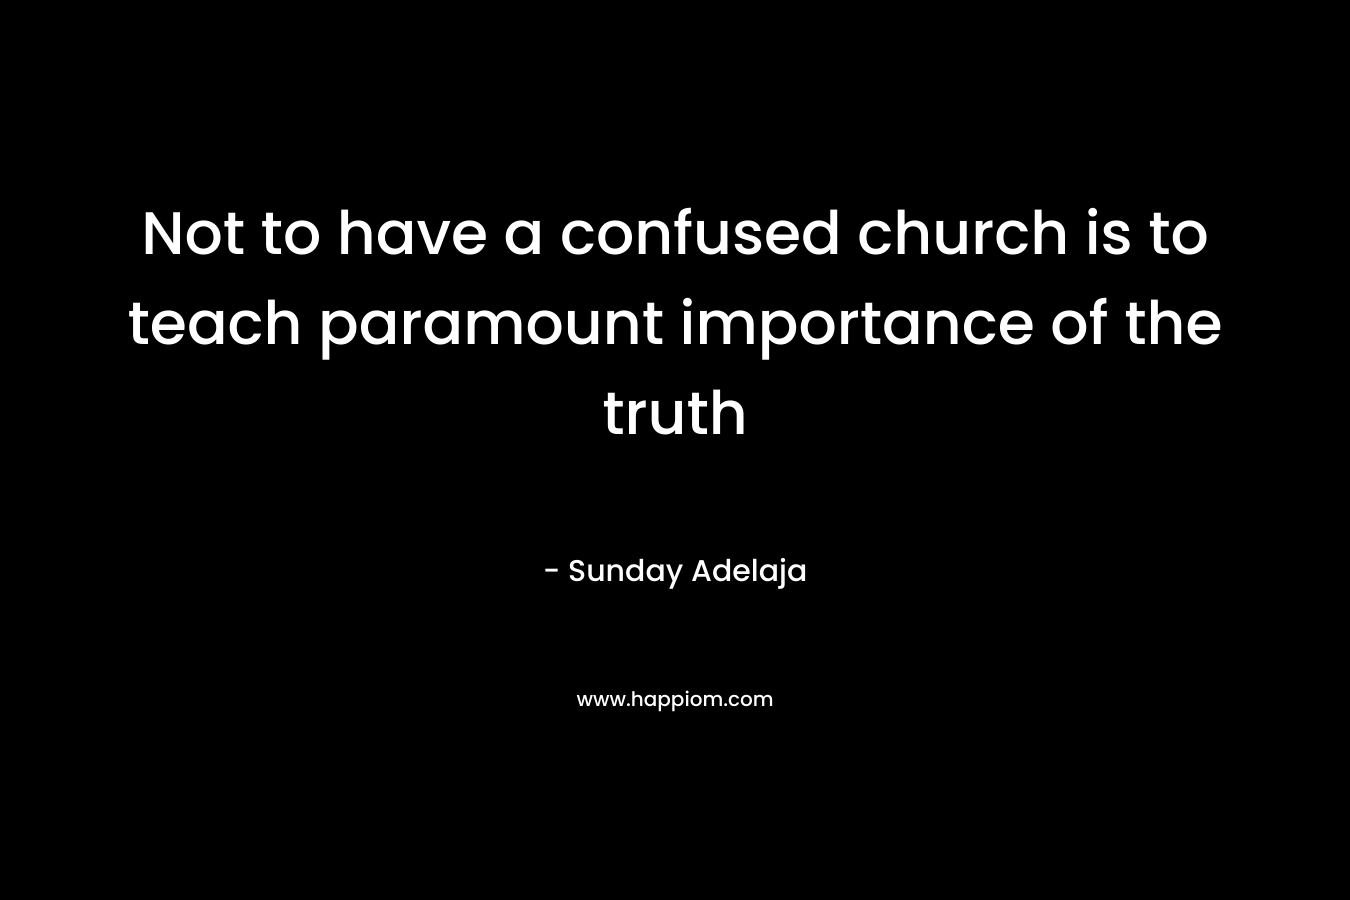 Not to have a confused church is to teach paramount importance of the truth